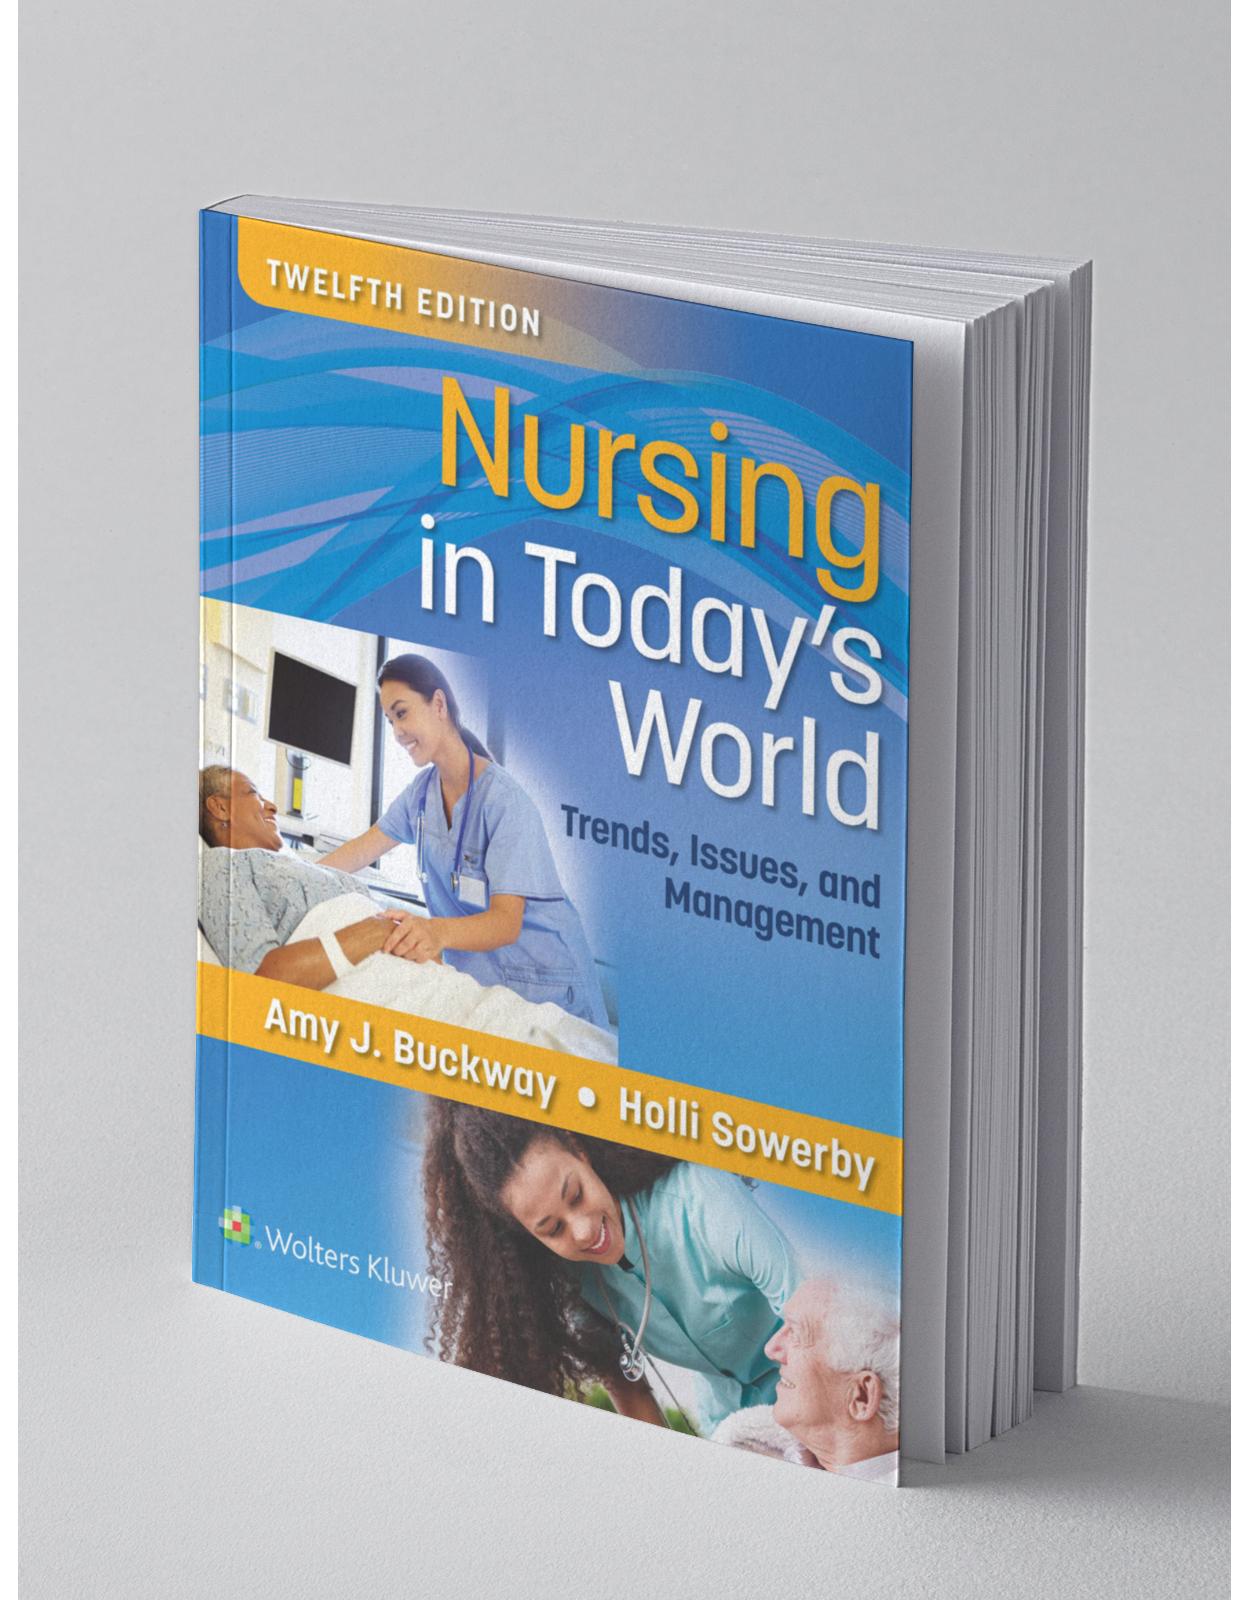 Nursing in Today’s World: Trends, Issues, and Management